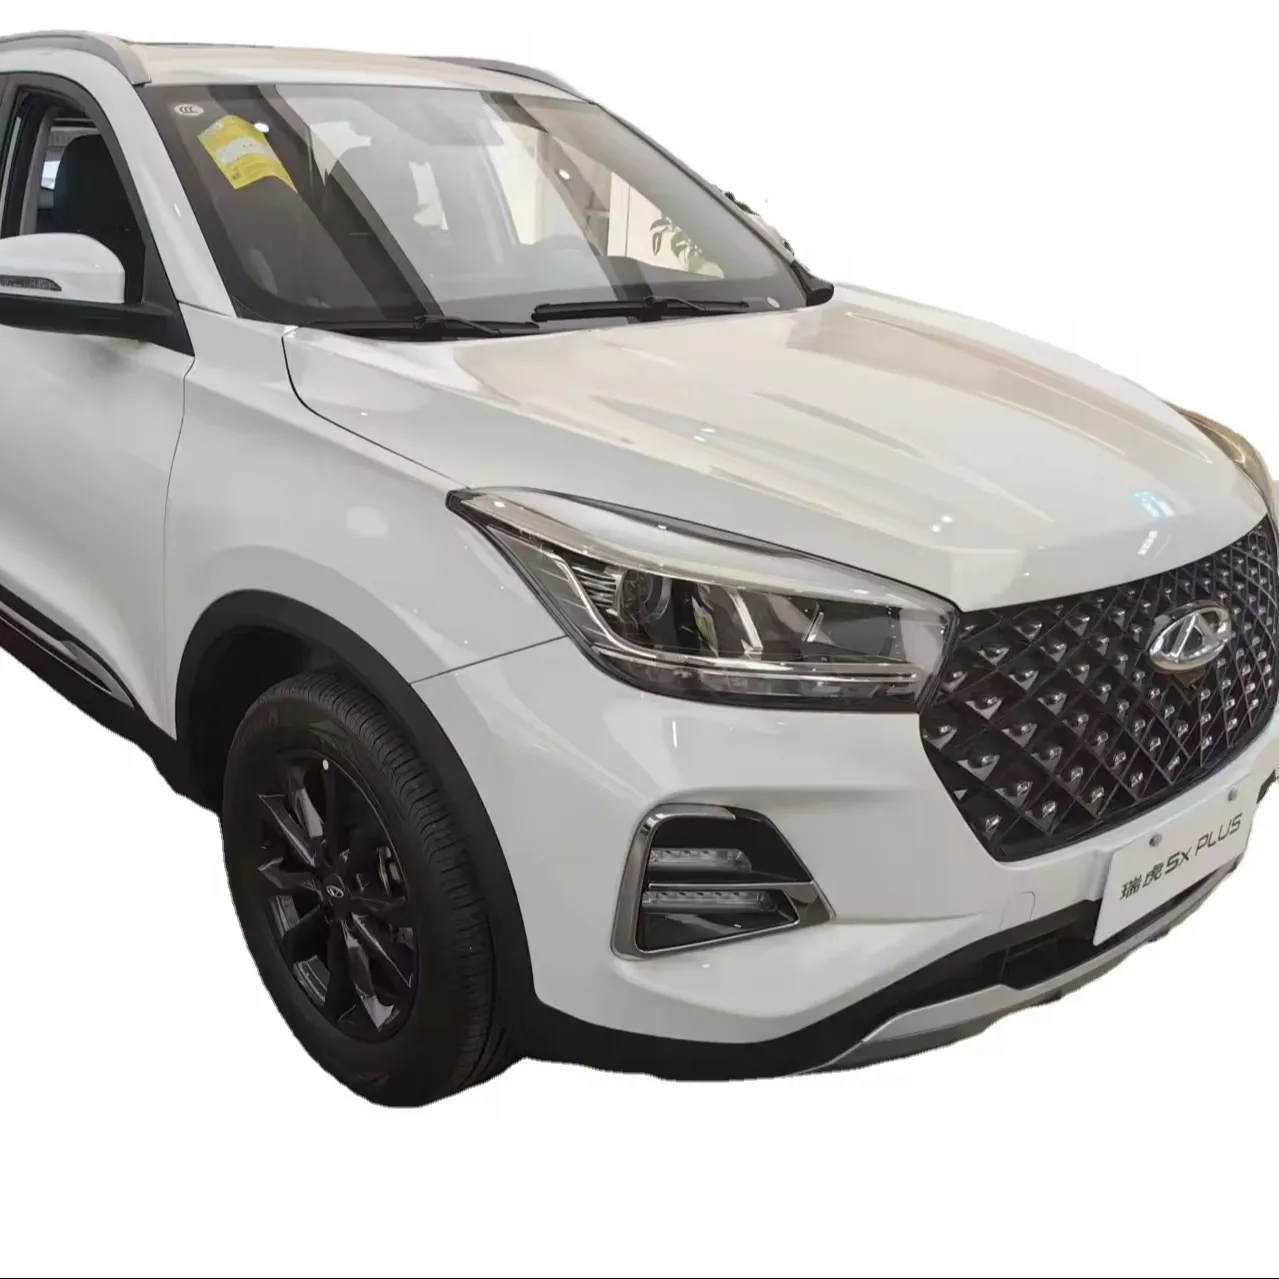 2023 1.5T CVT Luxury Edition Chinese New Cars Gasoline Car Petrol Car Compact SUV Chery Automobile